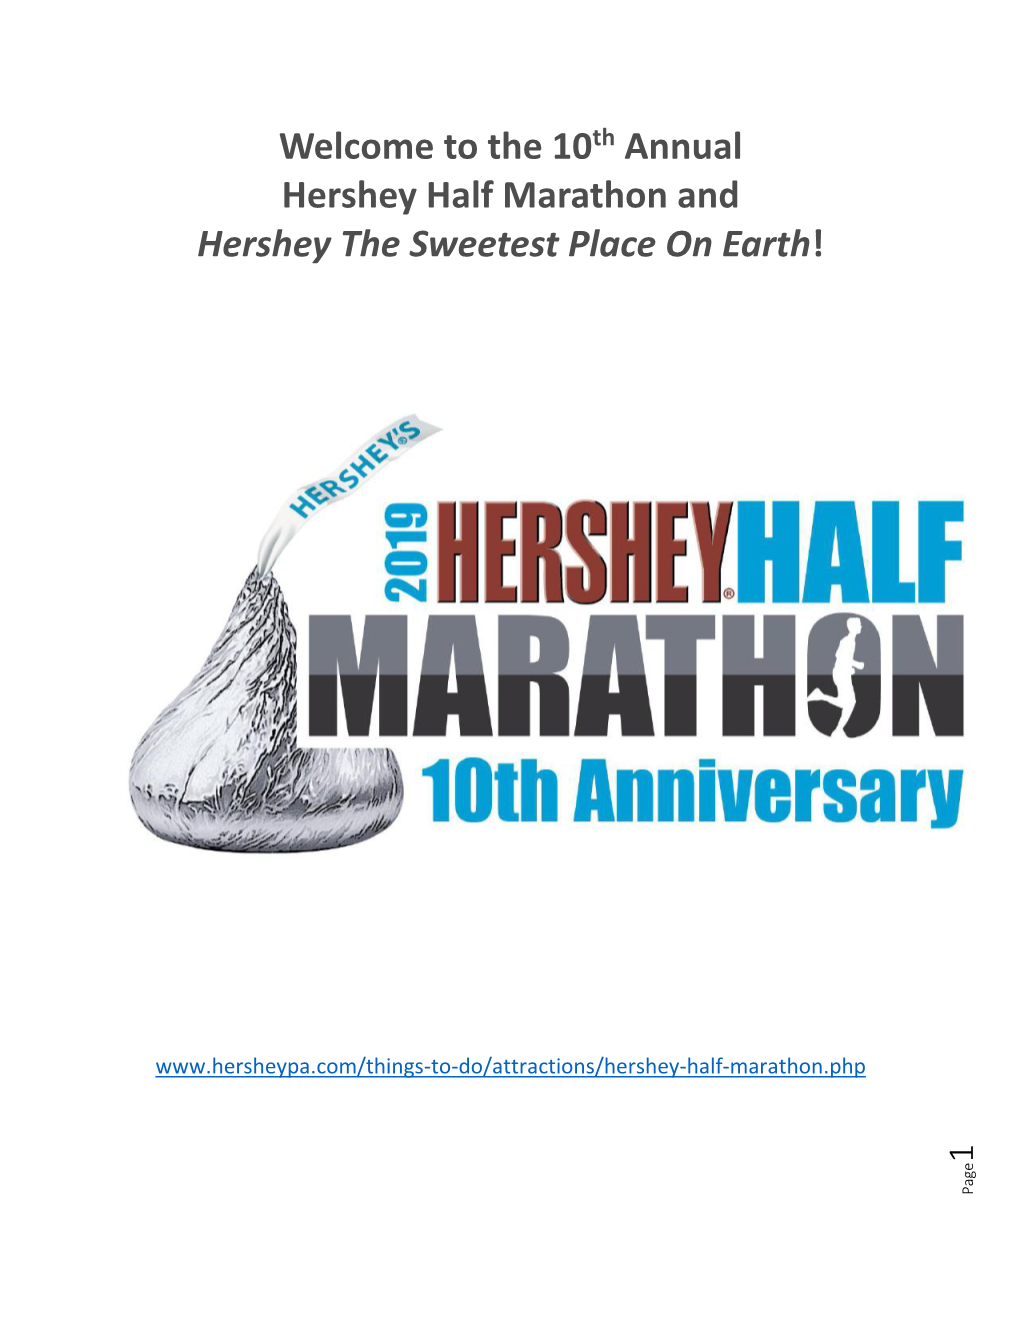 10Th Annual Hershey Half Marathon and Hershey the Sweetest Place on Earth!